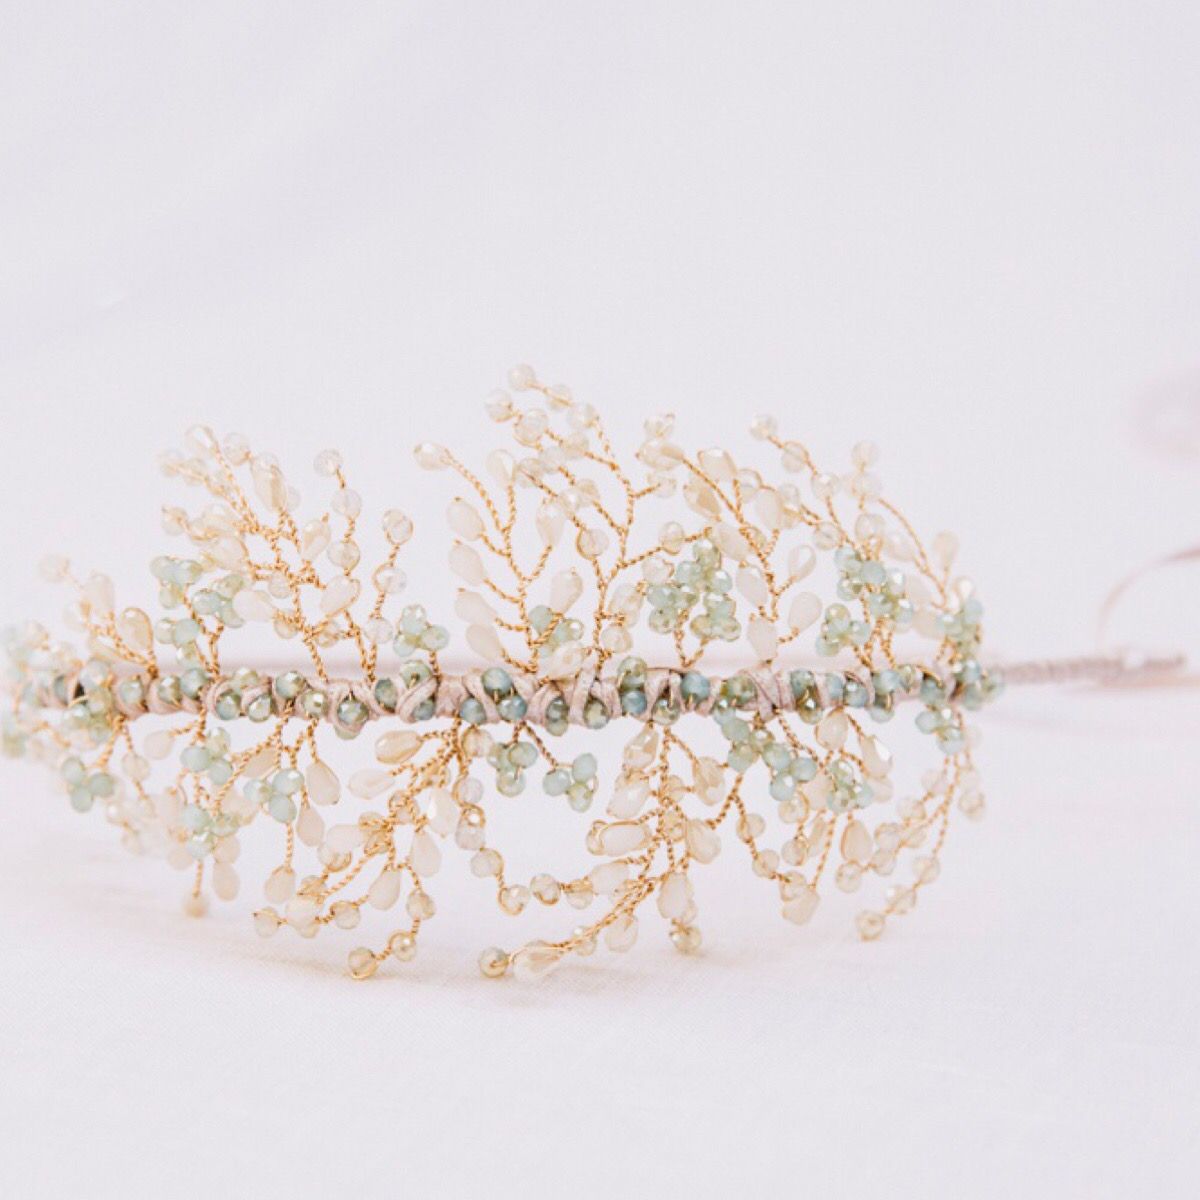 Lightweight and comfortable wedding headdress with side detail of pale blue and taupe crystals